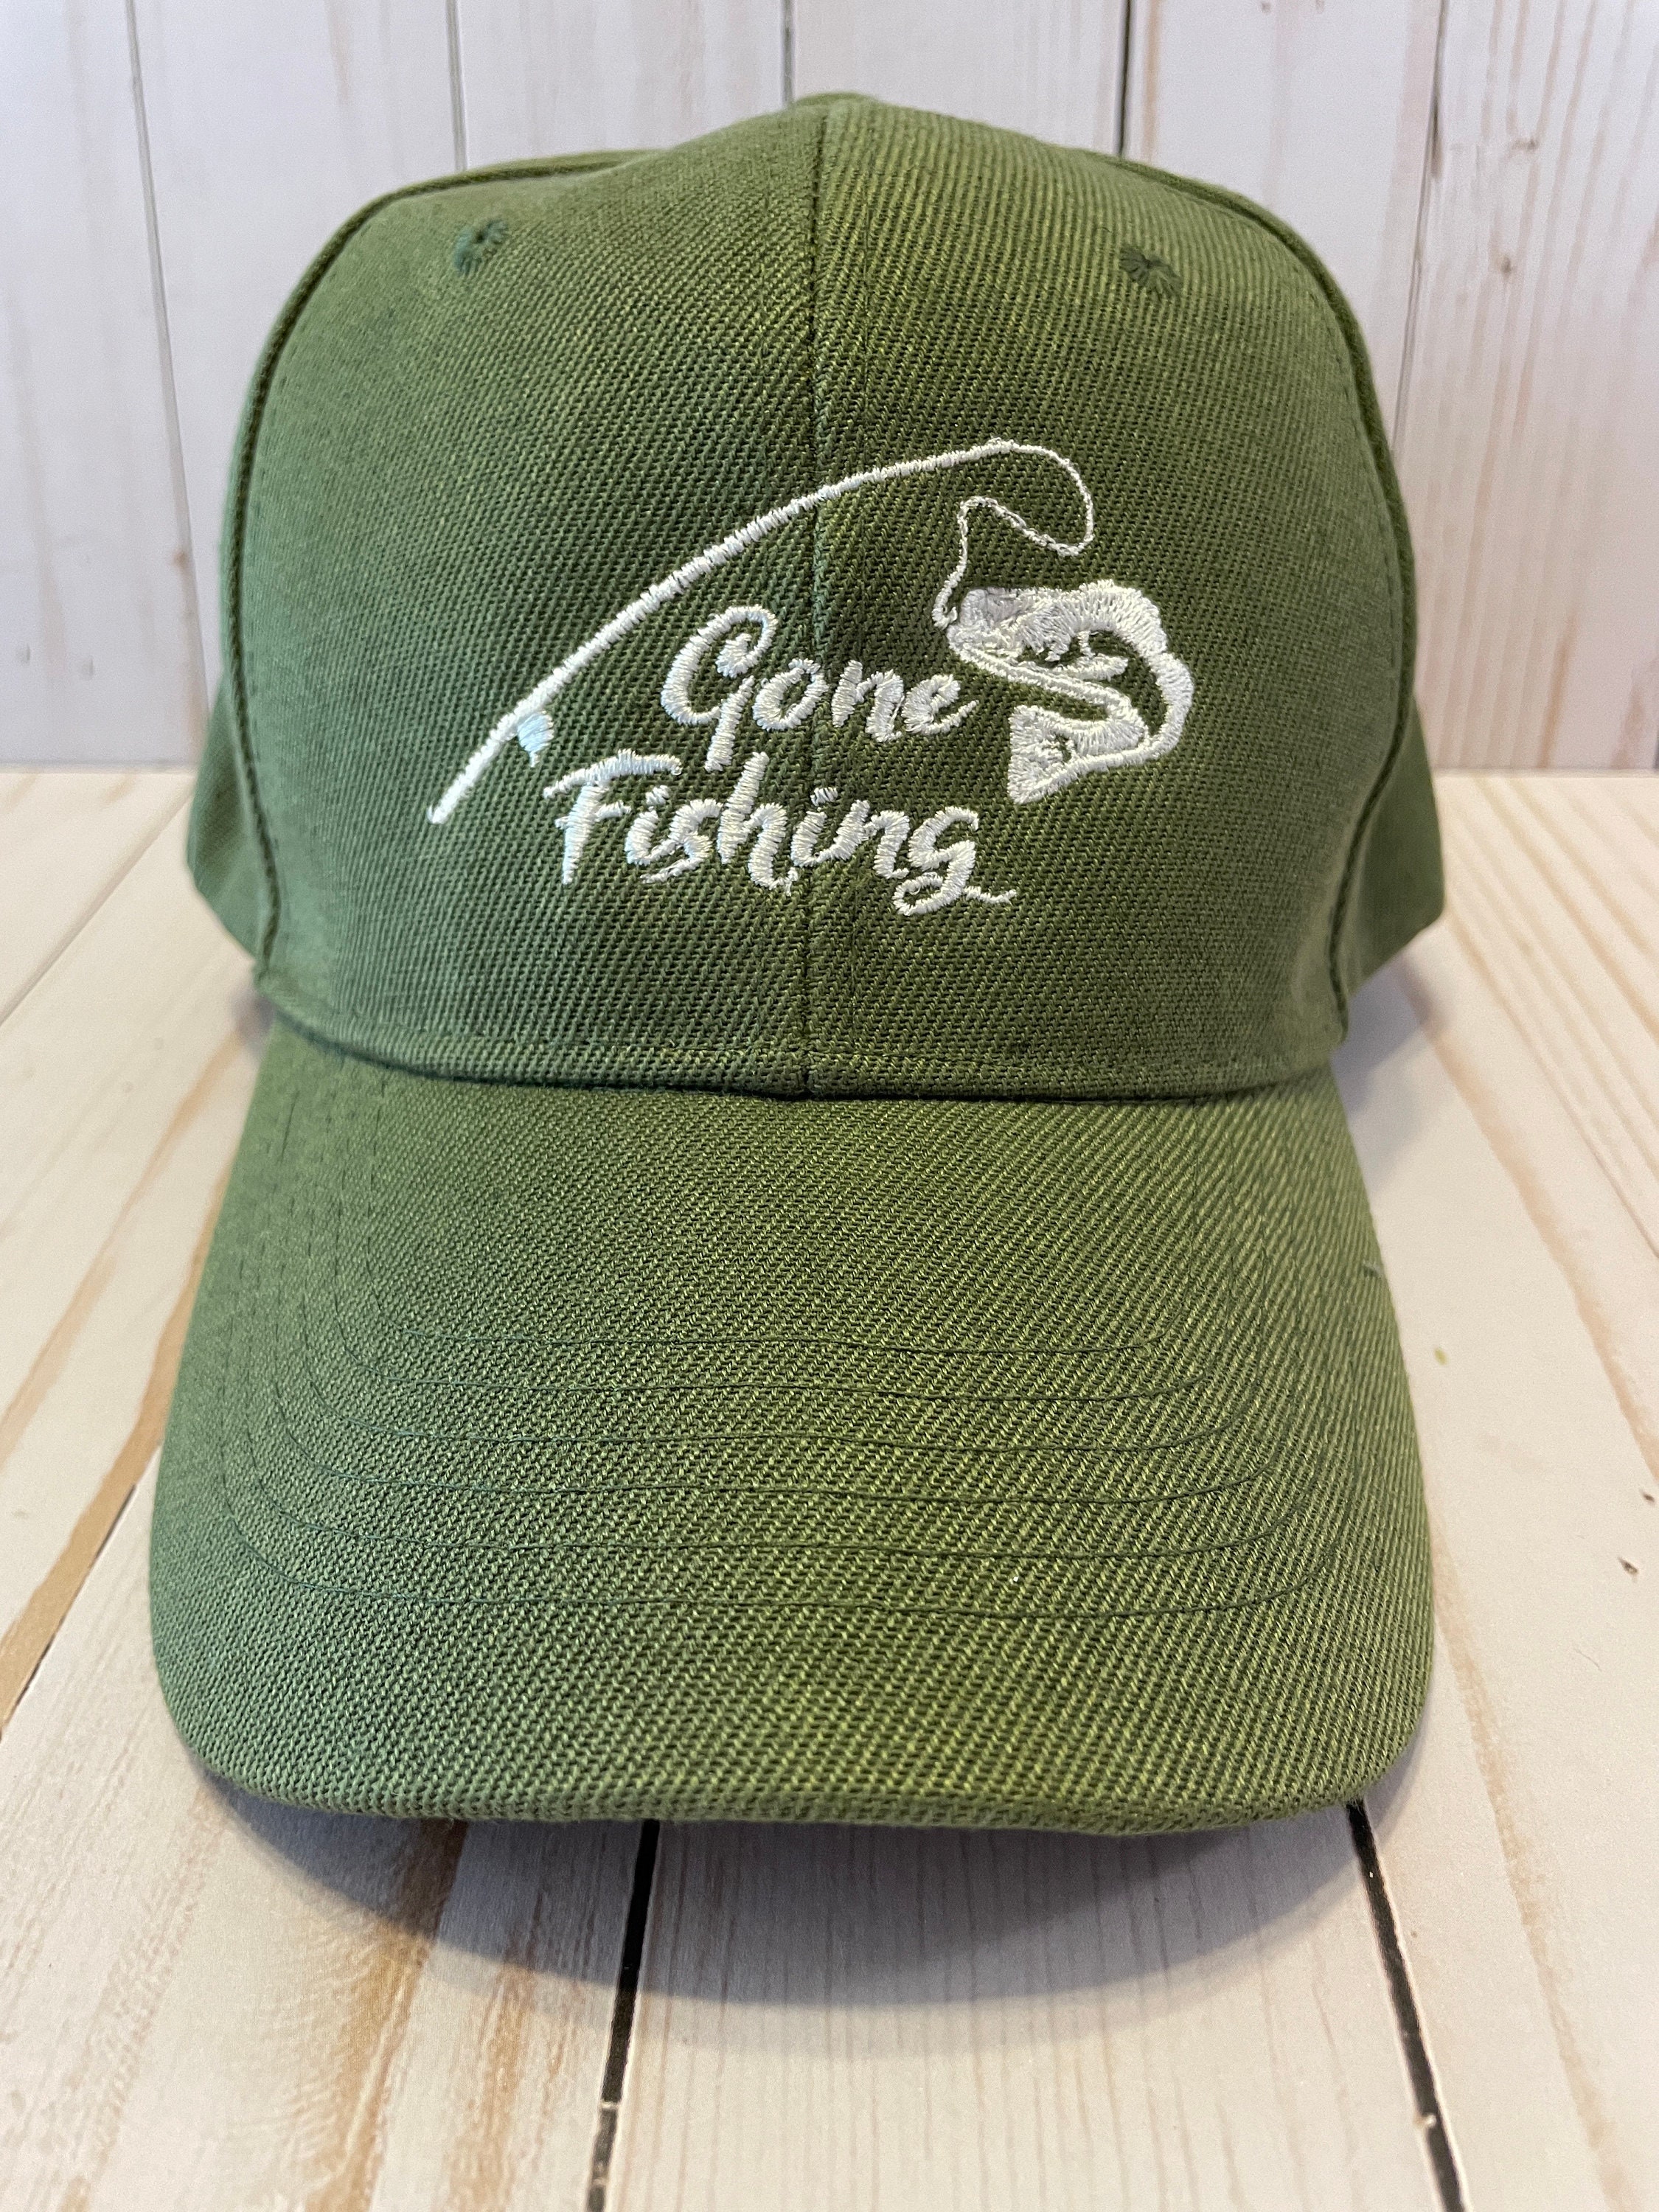 Gone Fishing Baseball Hat, Vacation Hat, Funny Saying, Embroidered Distressed Green Adjustable Vintage Baseball Cap Gift for Men Dad Grandpa